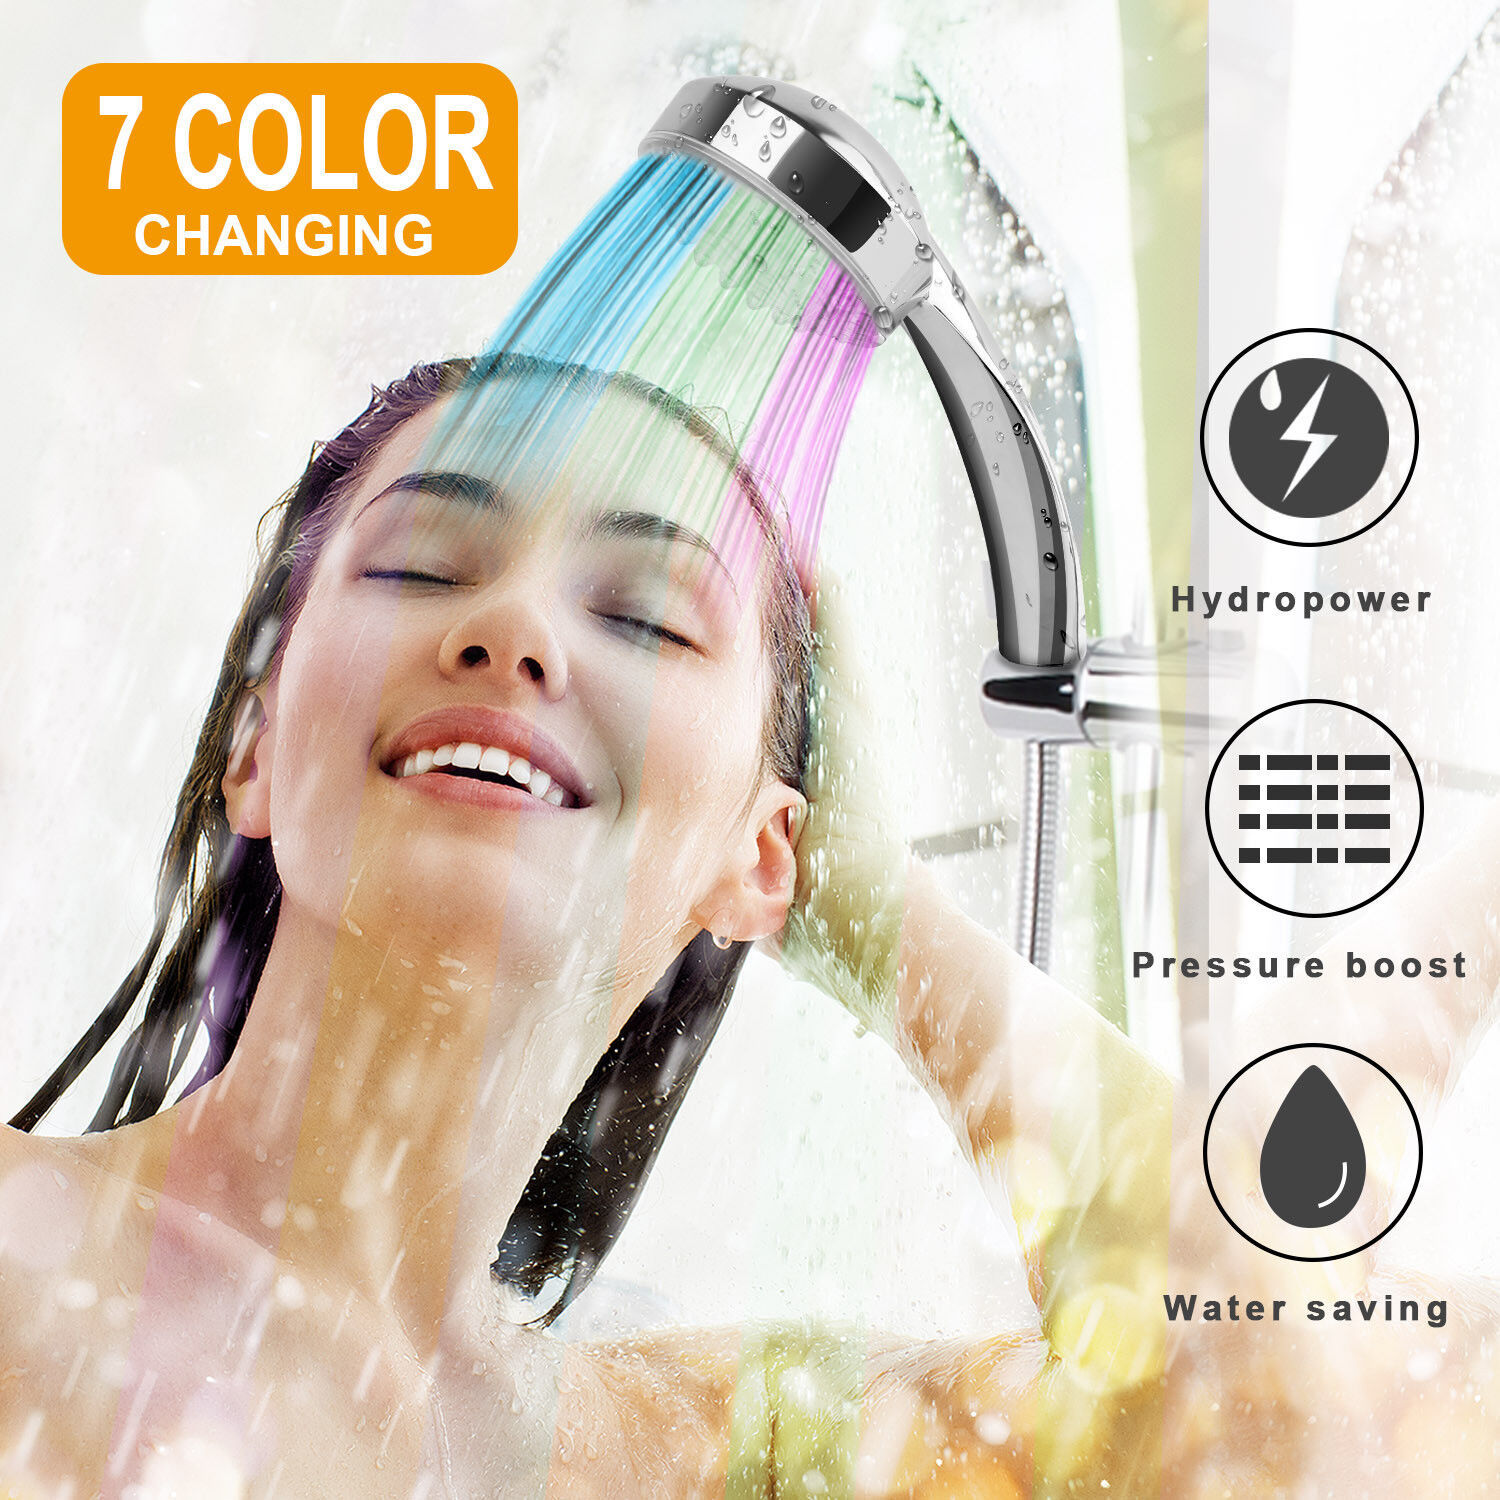 Primary image for iMounTEK LED Shower Head Handheld 7-Color Changing Automatic Hydropower 50 Holes